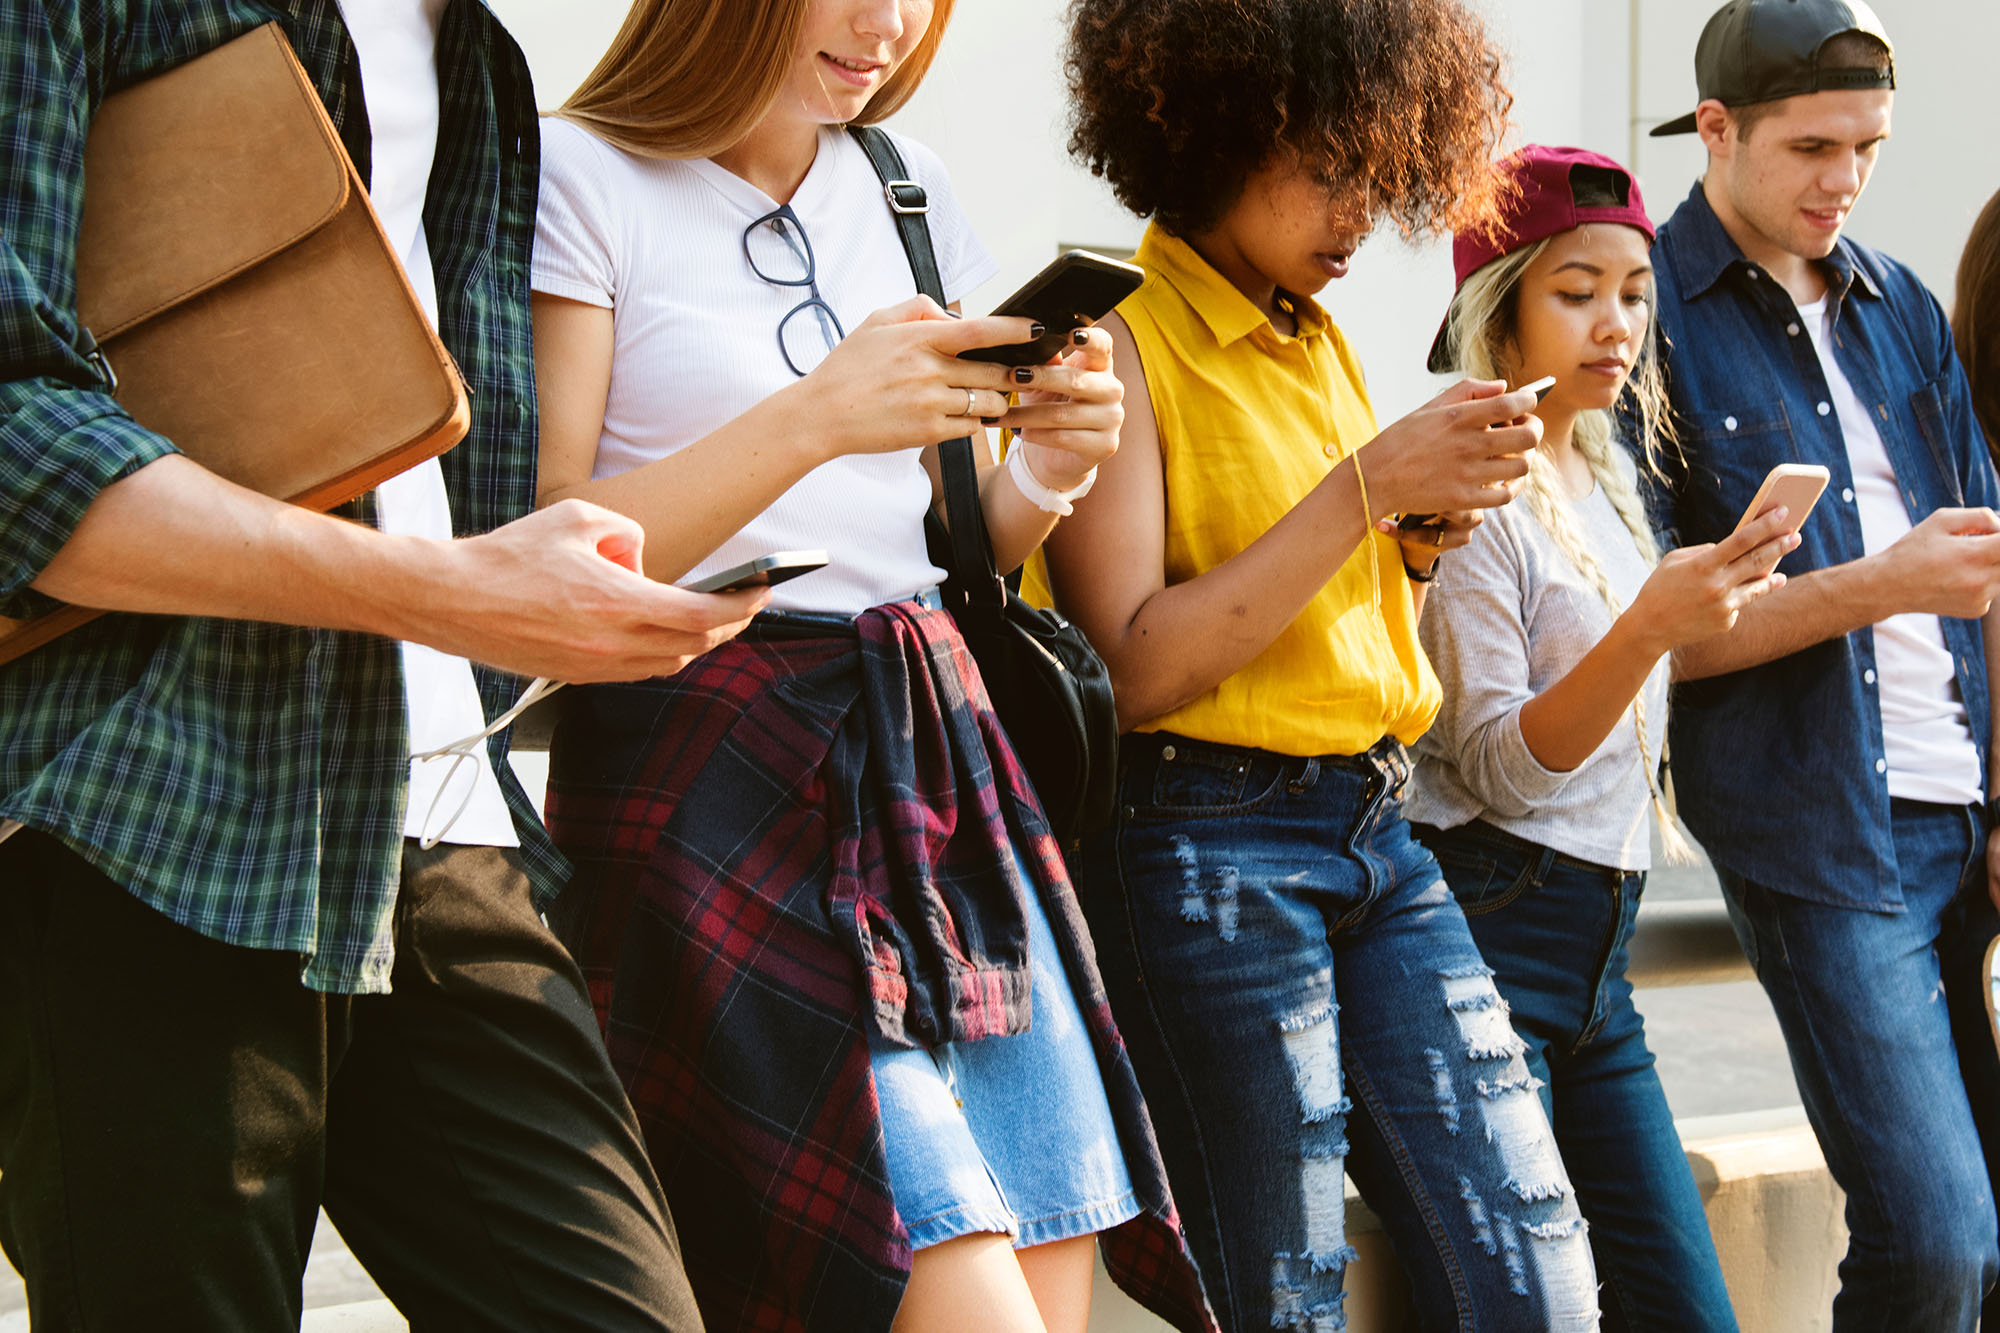 Gen Z shoppers: they want simplicity, speed, and touchless payments